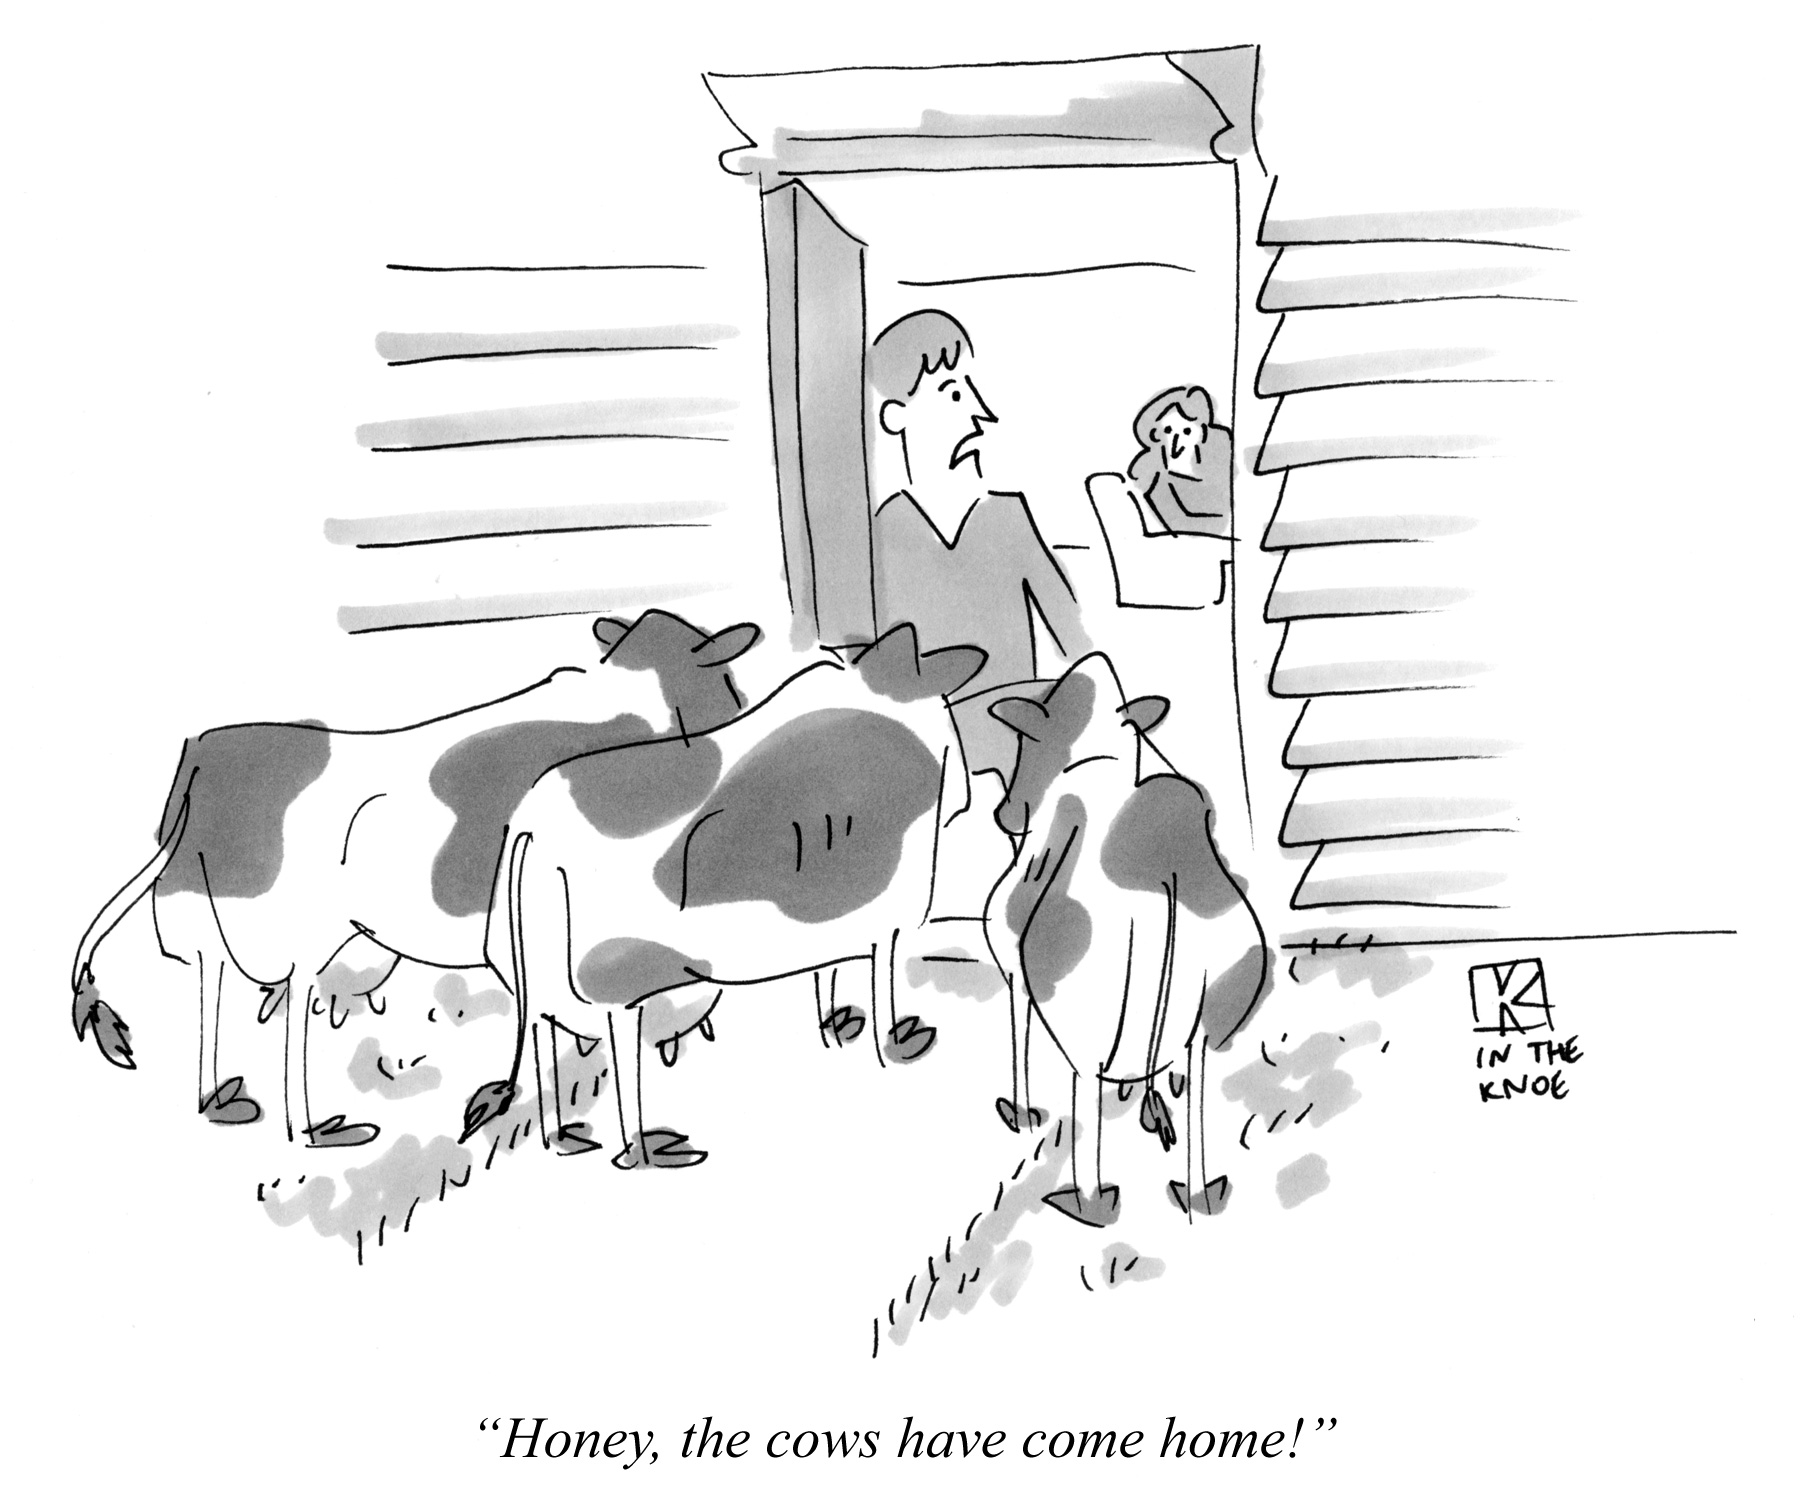 Honey, the cows have come home!